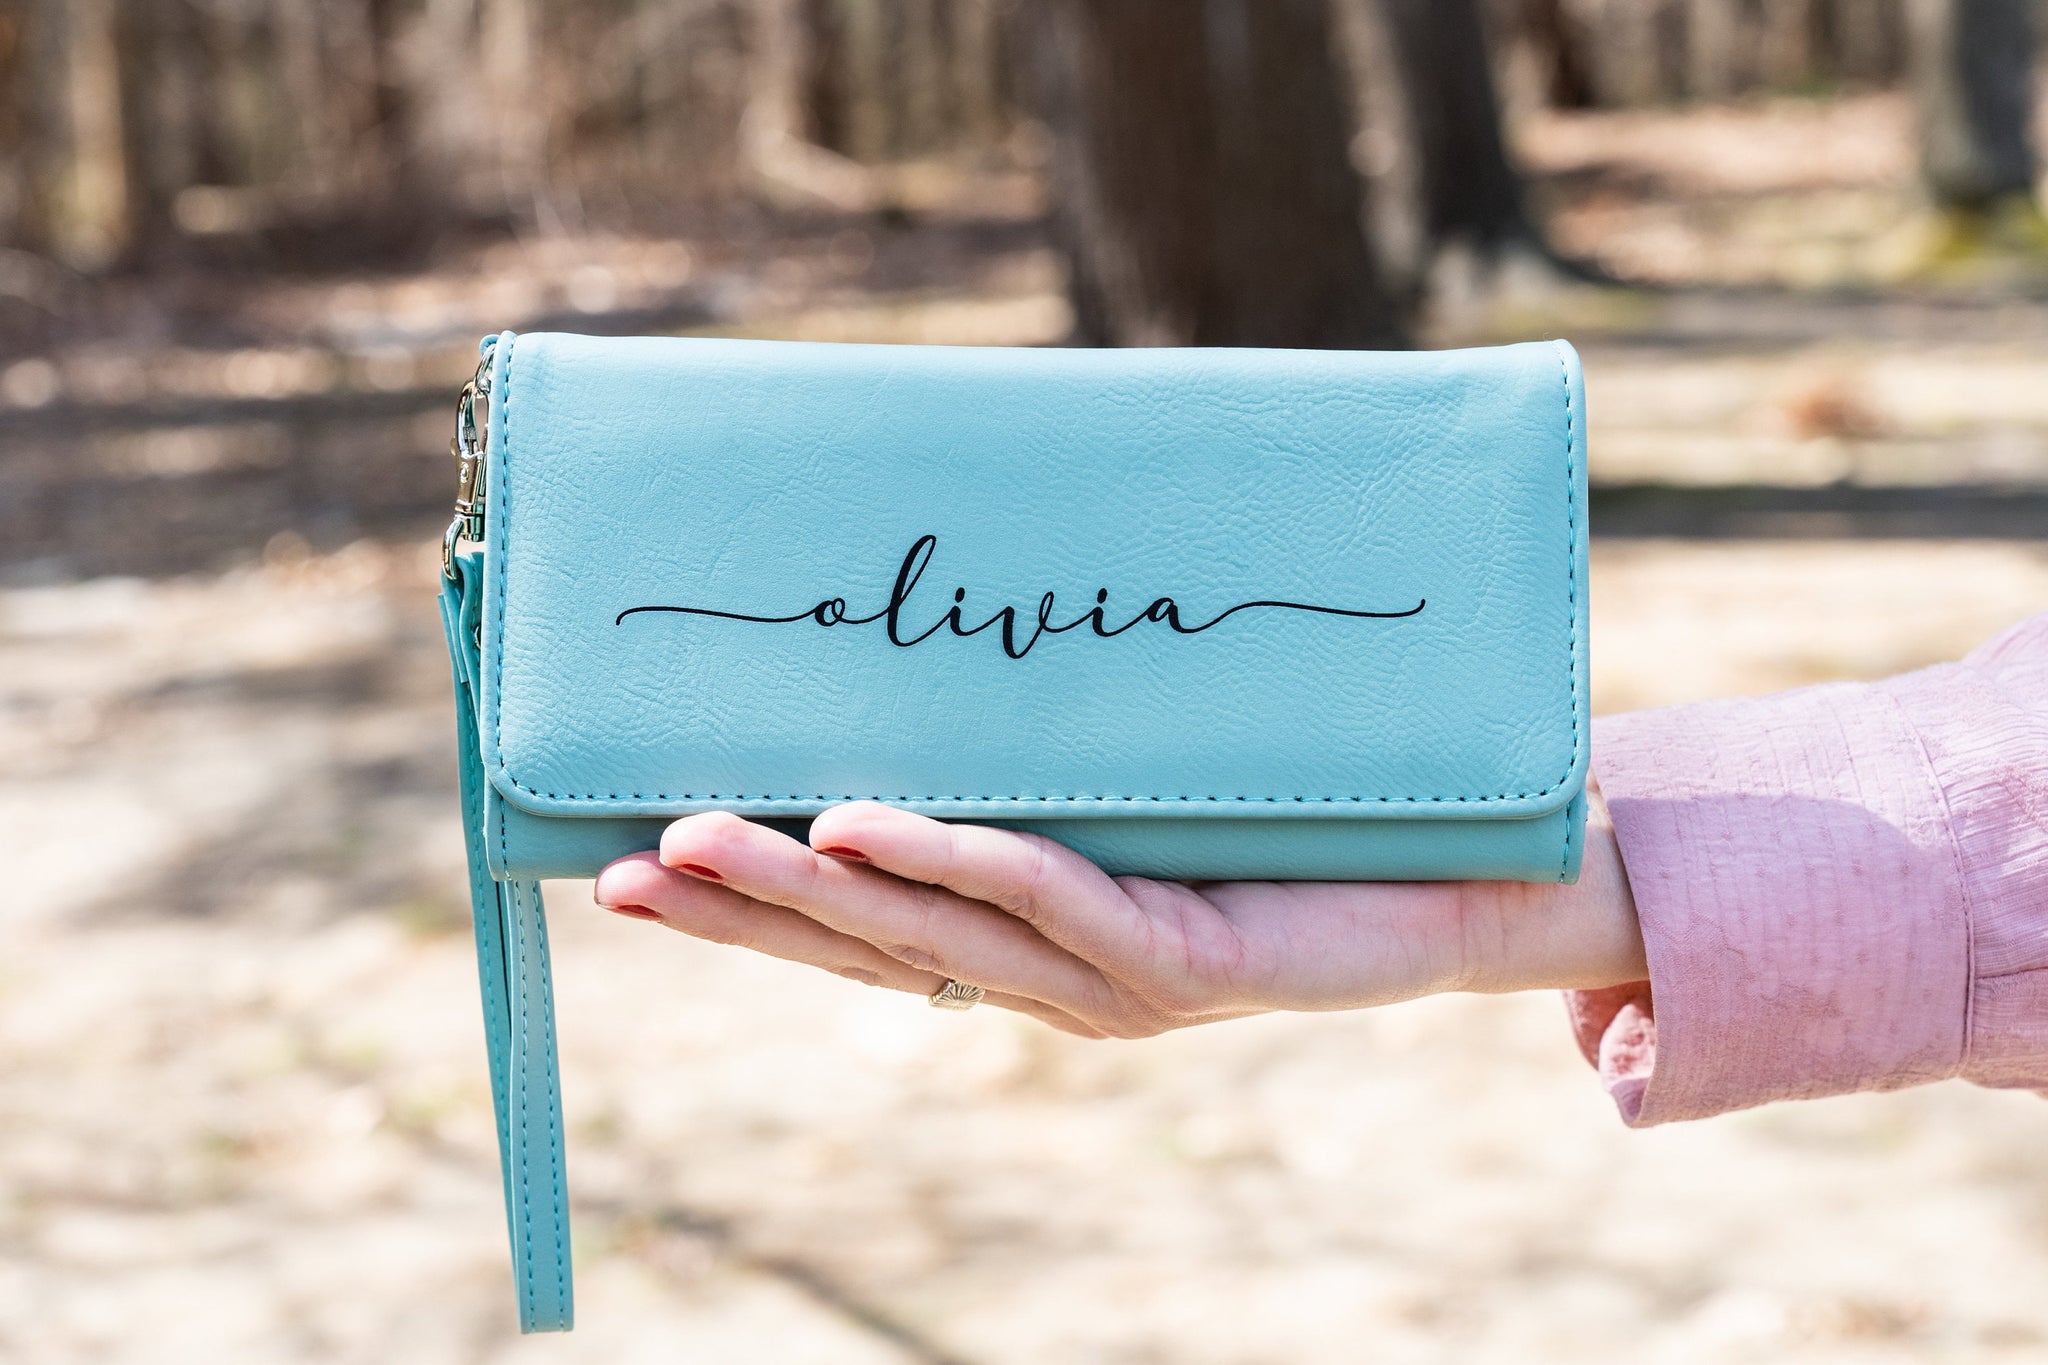 Stella Women's Wallet, Vegan Leather Wallet, Personalized Gifts for He